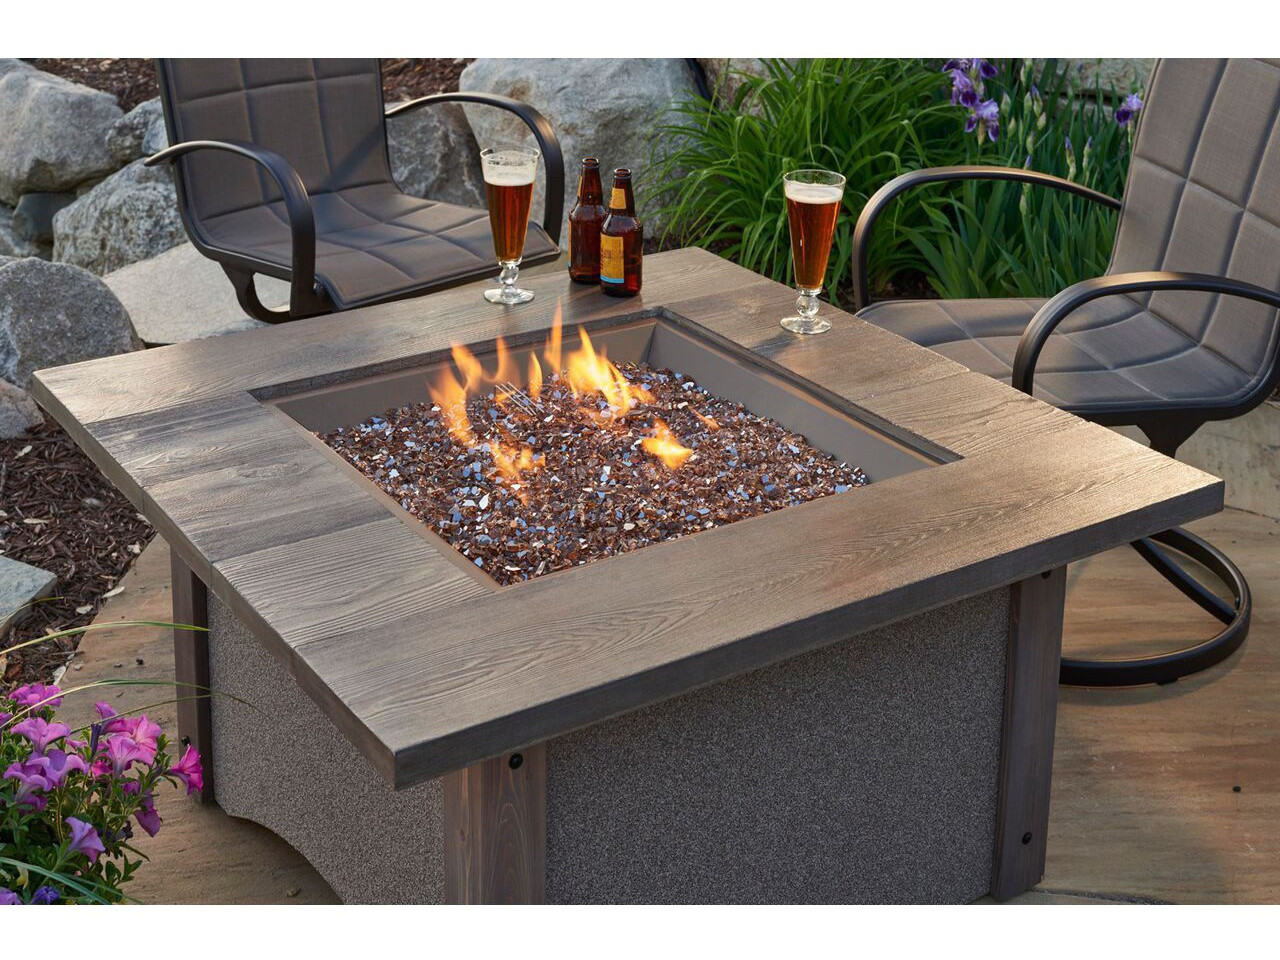 Patio Table With Fire Pit
 Outdoor GreatRoom Pine Ridge Square Fire Pit Table with